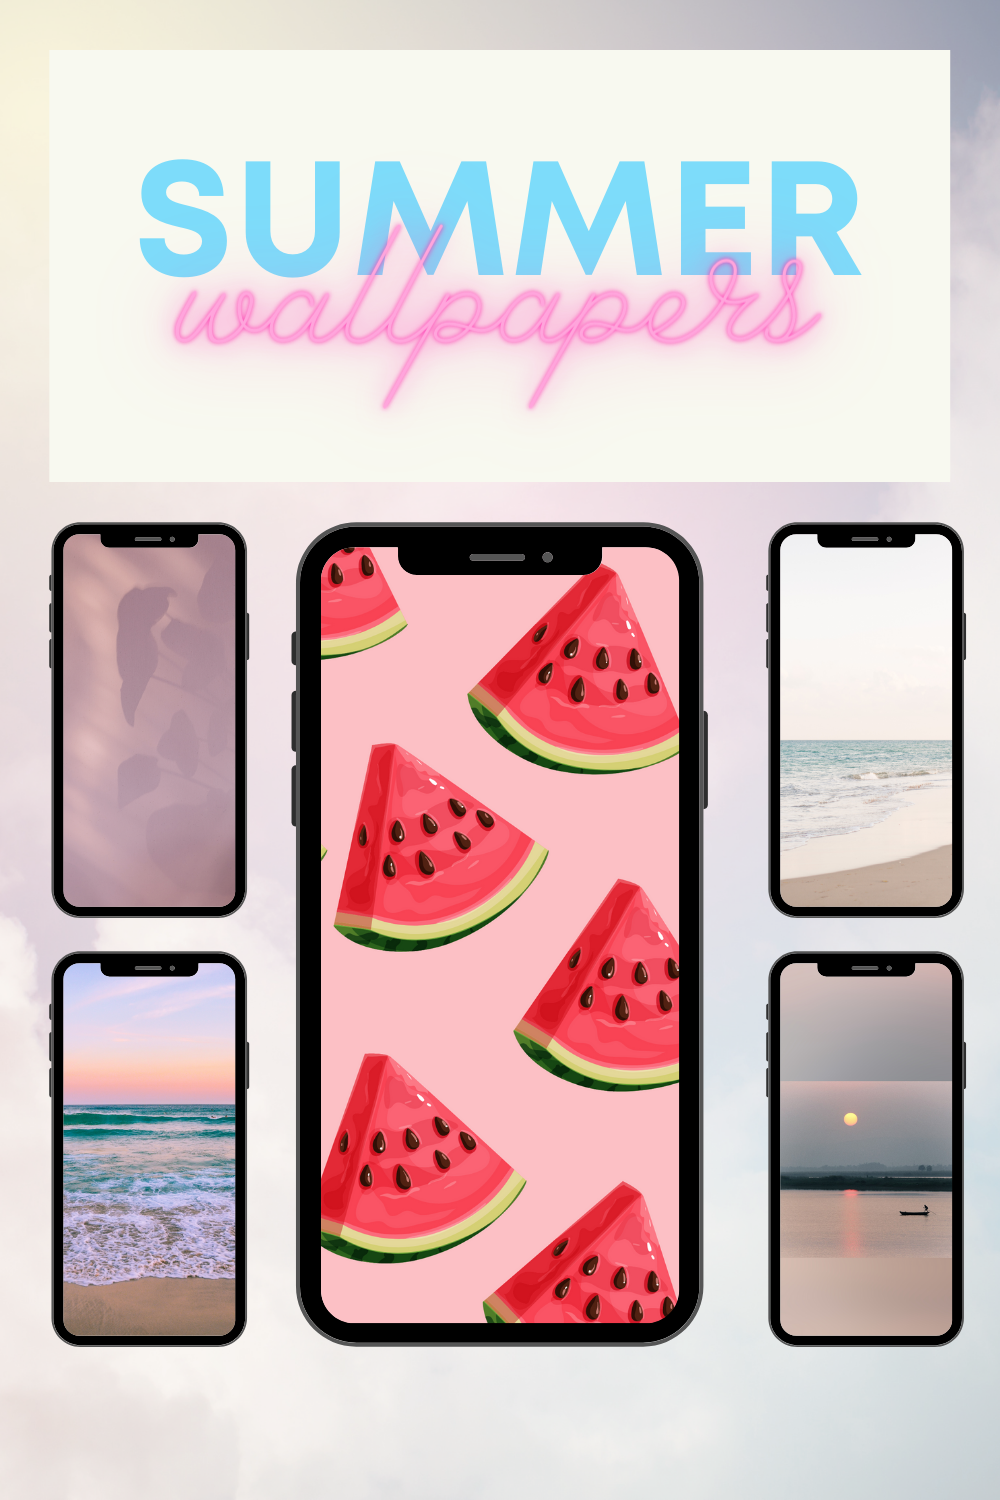 Free iphone wallpapers for summer